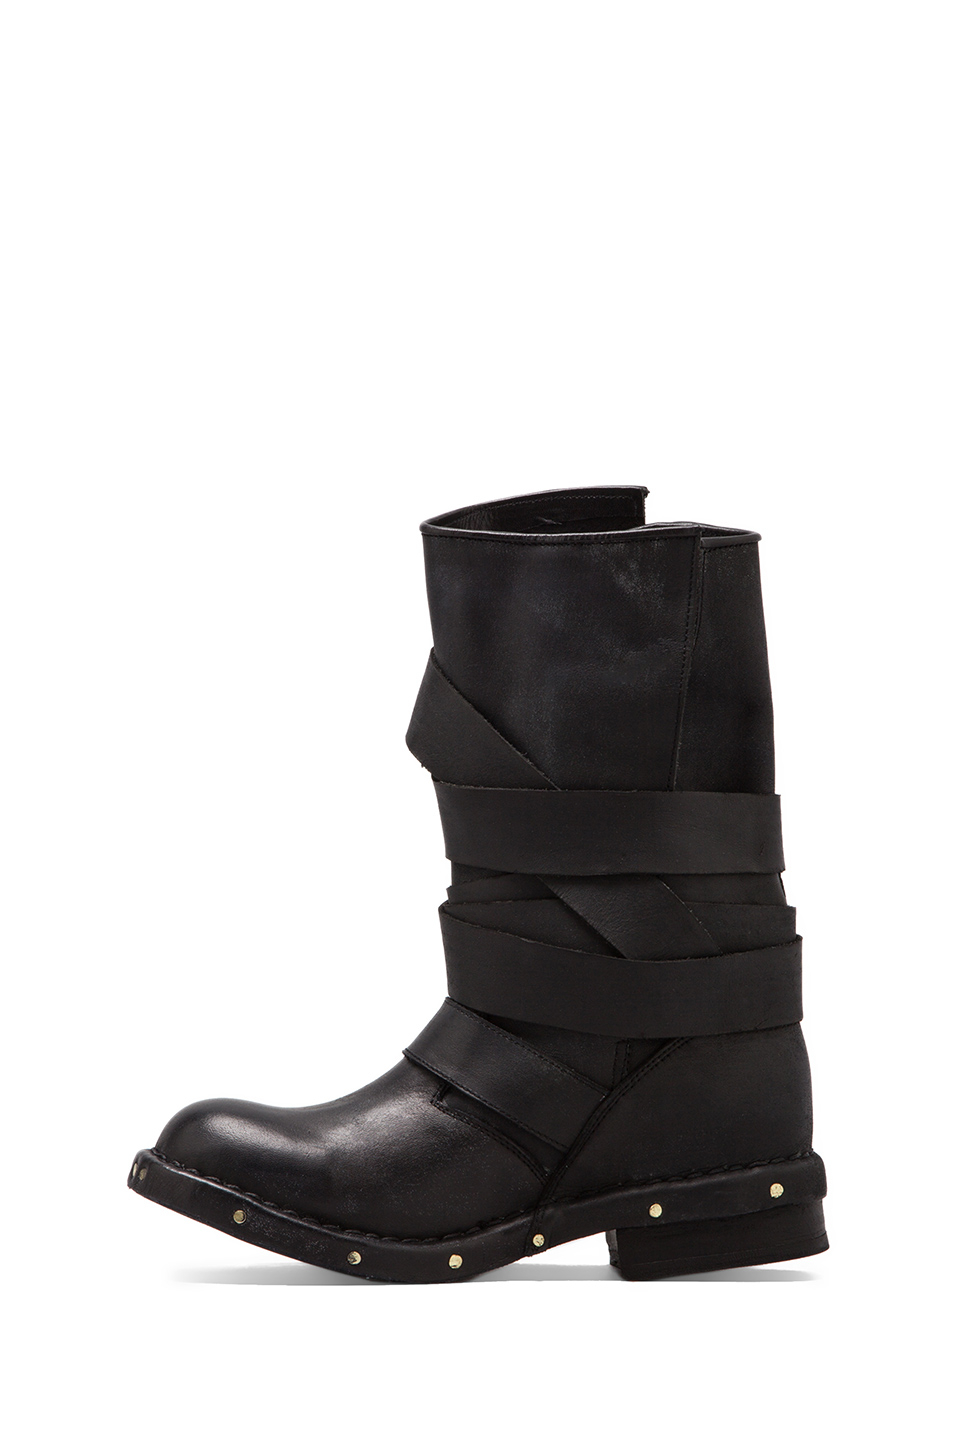 Lyst - Jeffrey Campbell Brit Leather Moto Boot in Black in Black